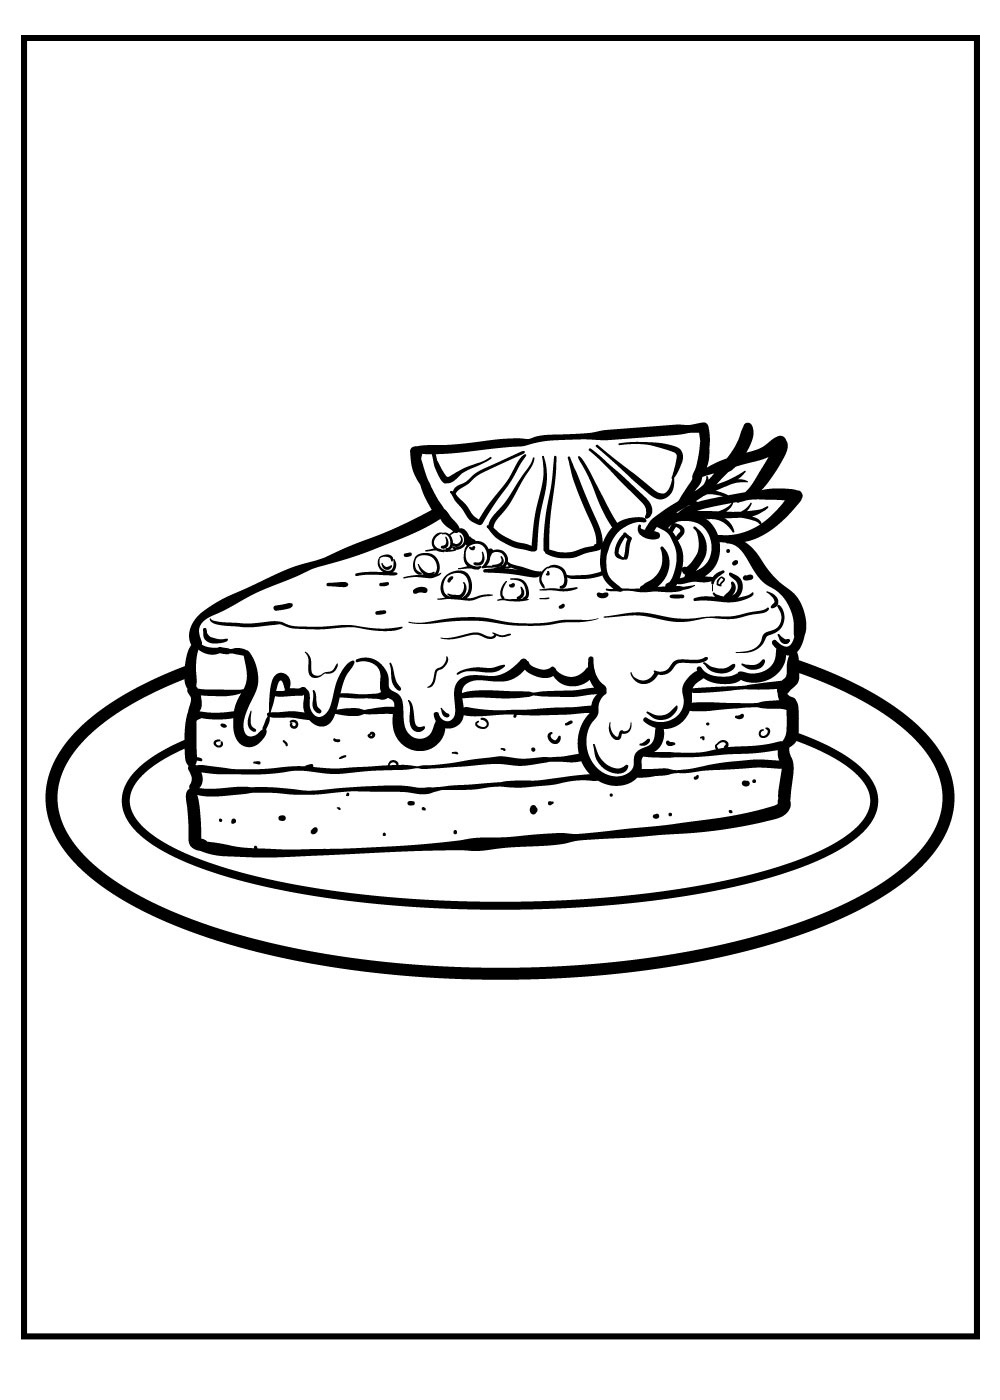 Delicious Birthday Cake Piece On Plate For Kids Coloring Page